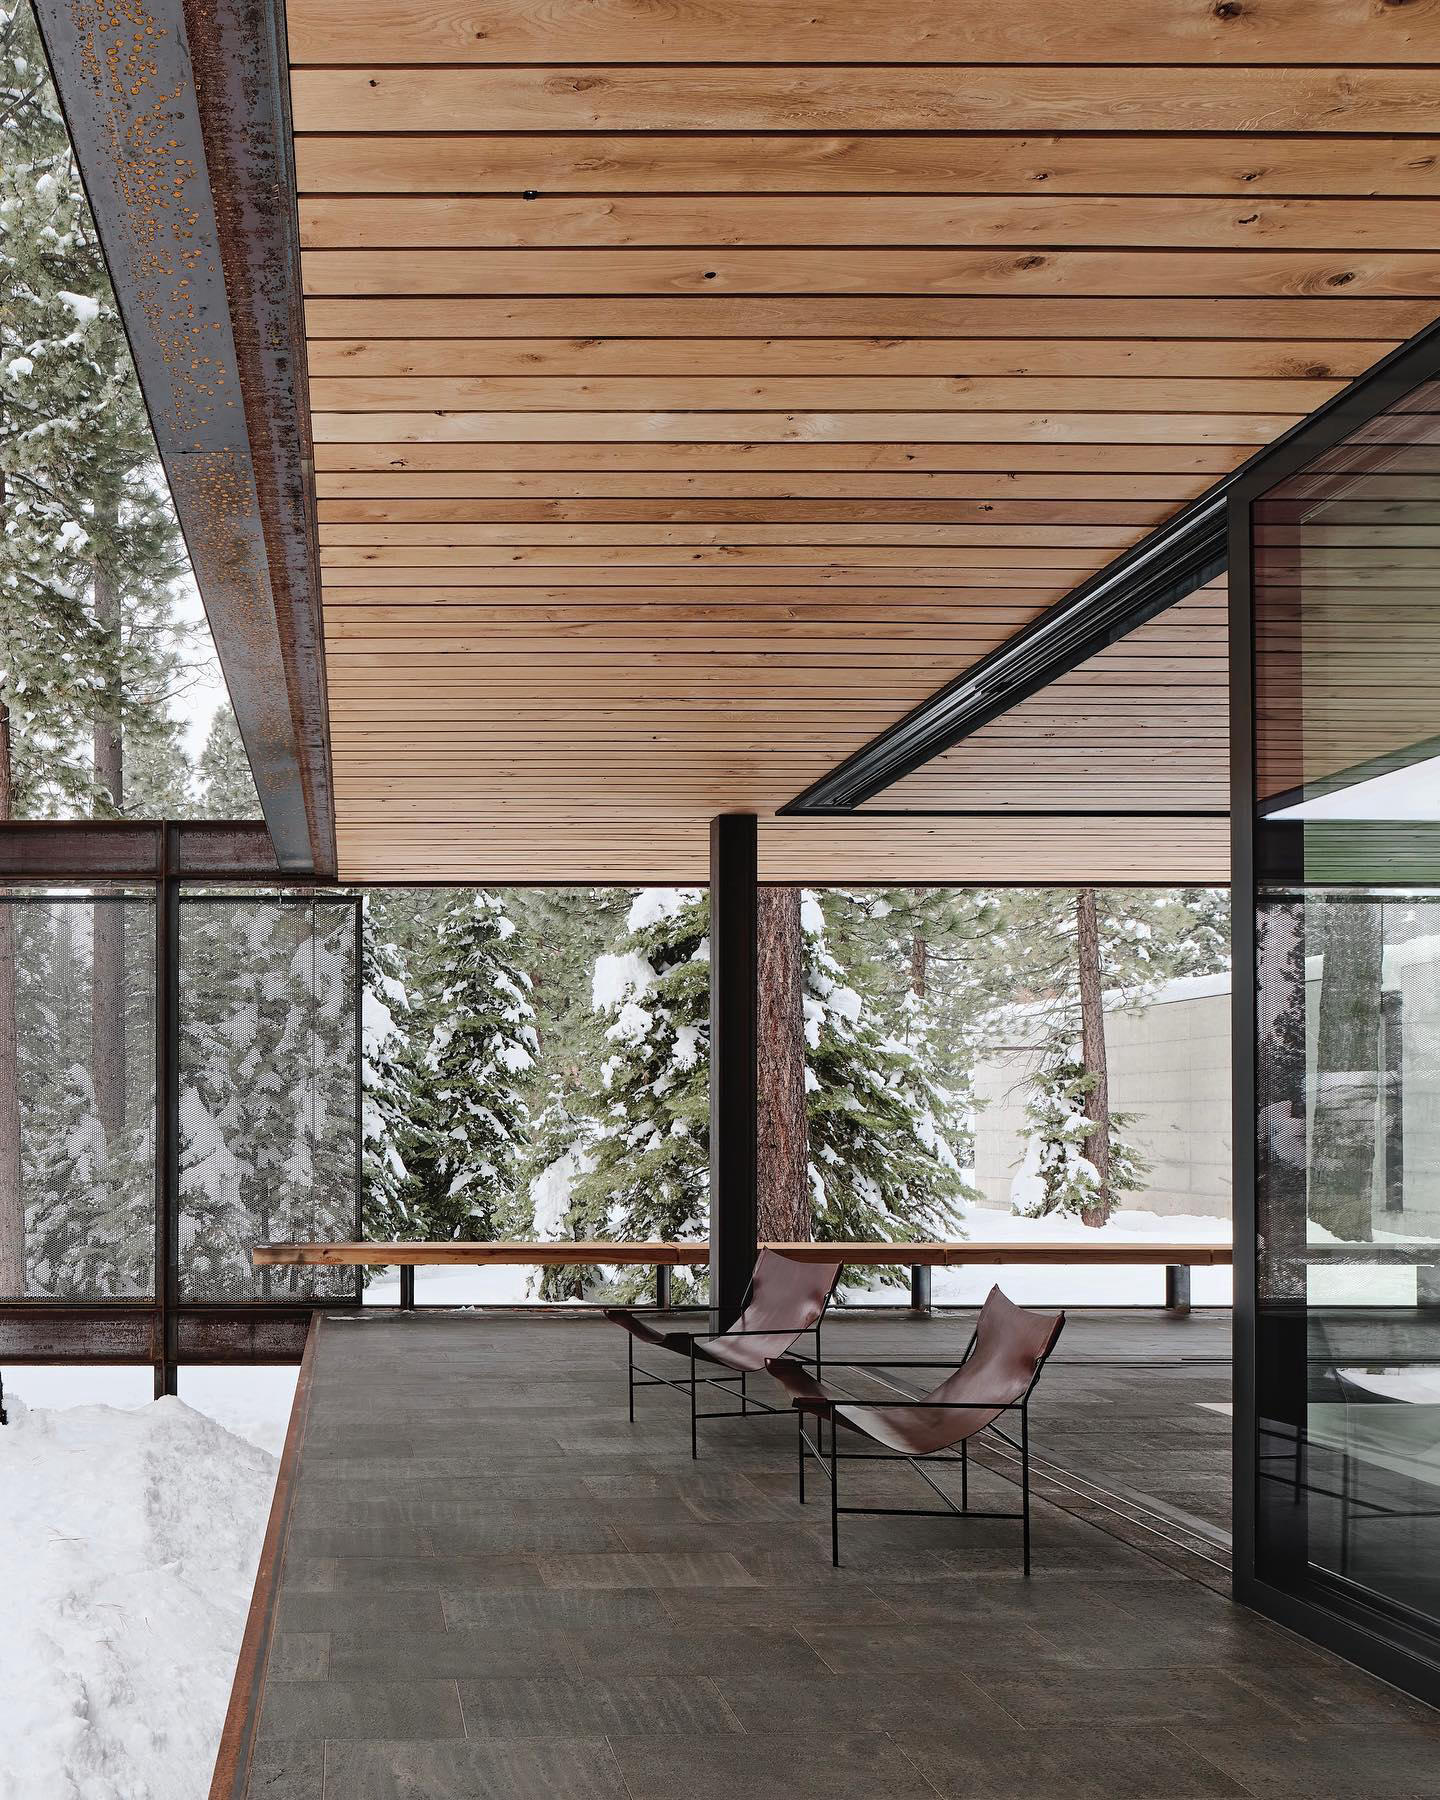 designboom magazine - #olsonkundig takes to truckee, #california with its ‘analog house’ — completed